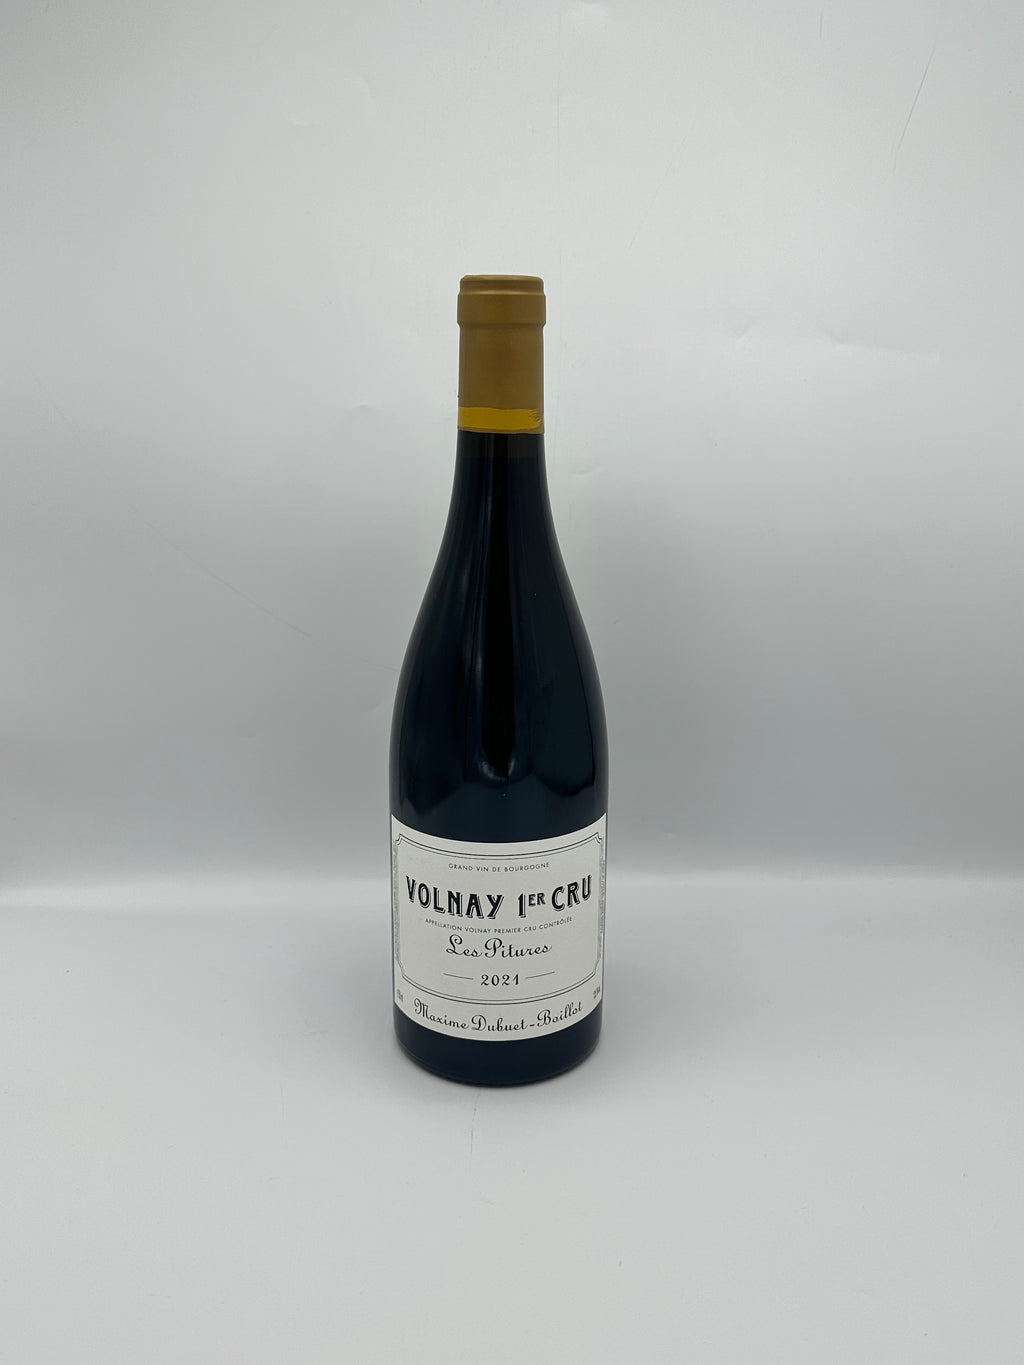 Volnay 1er Cru "Les Pitures" 2021 Rouge - Maxime Dubuet Boillot